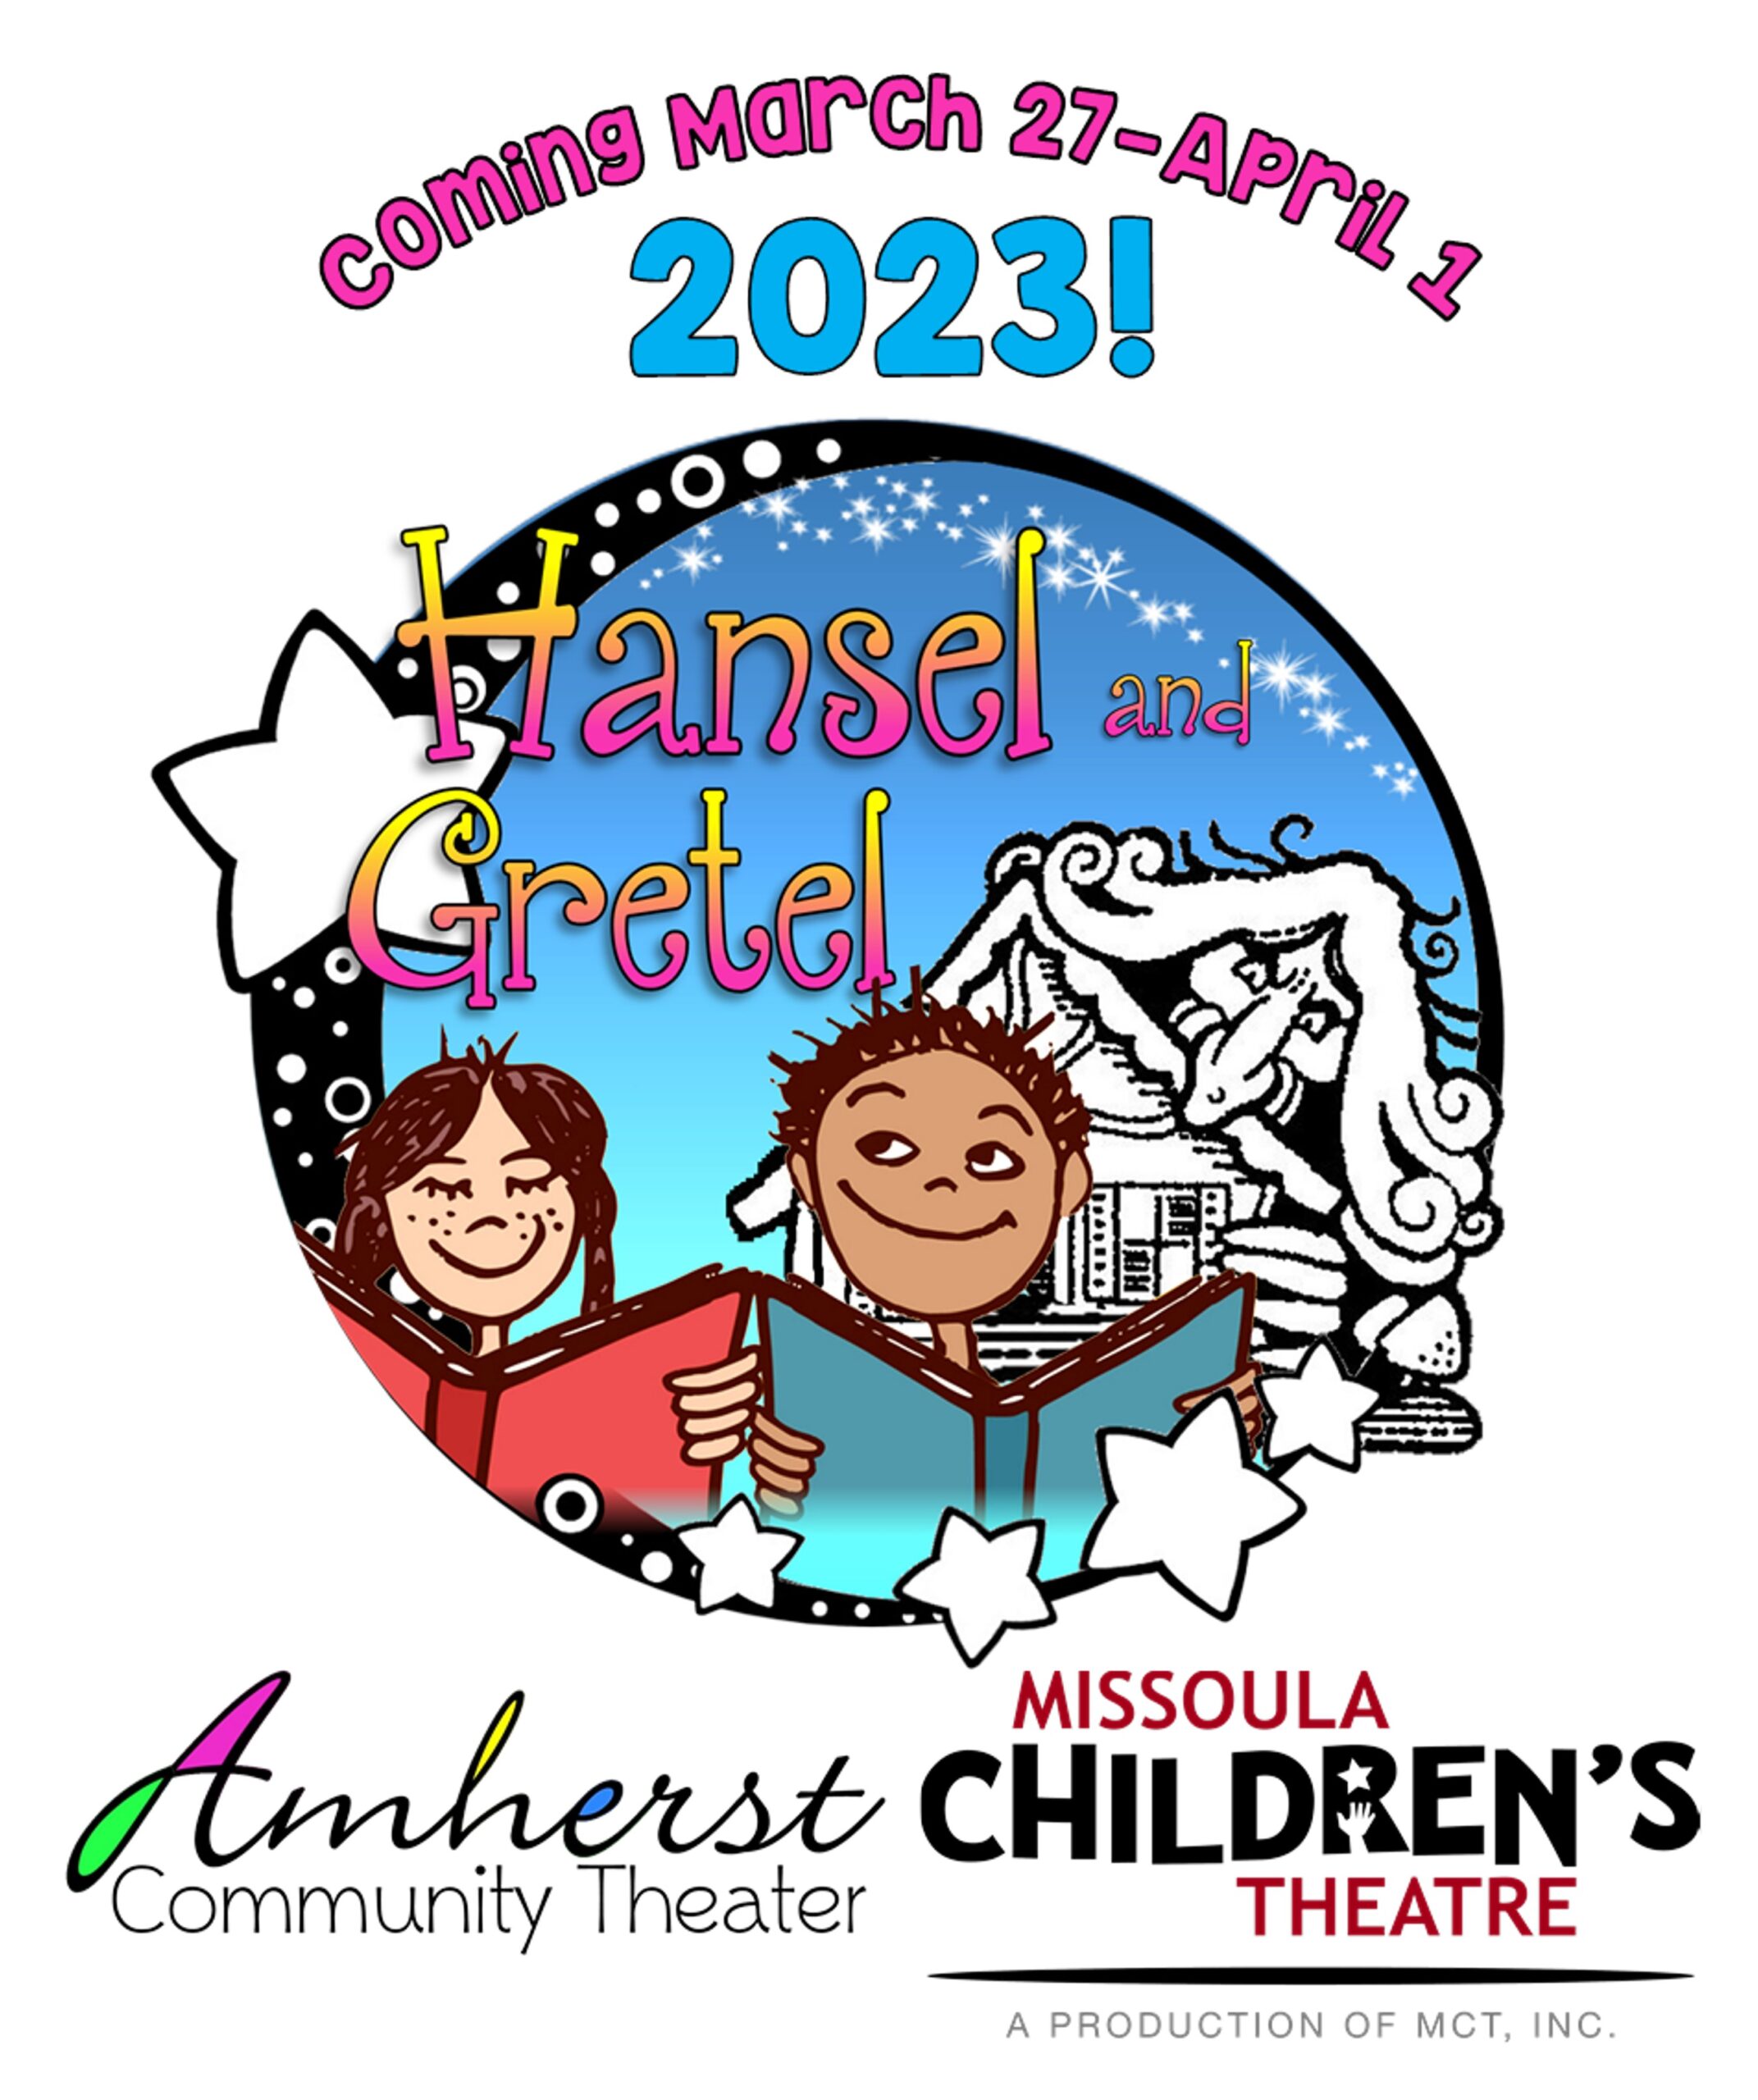 Coming March 27-April 1, 2023! Hansel and Gretel. More information coming later this year.